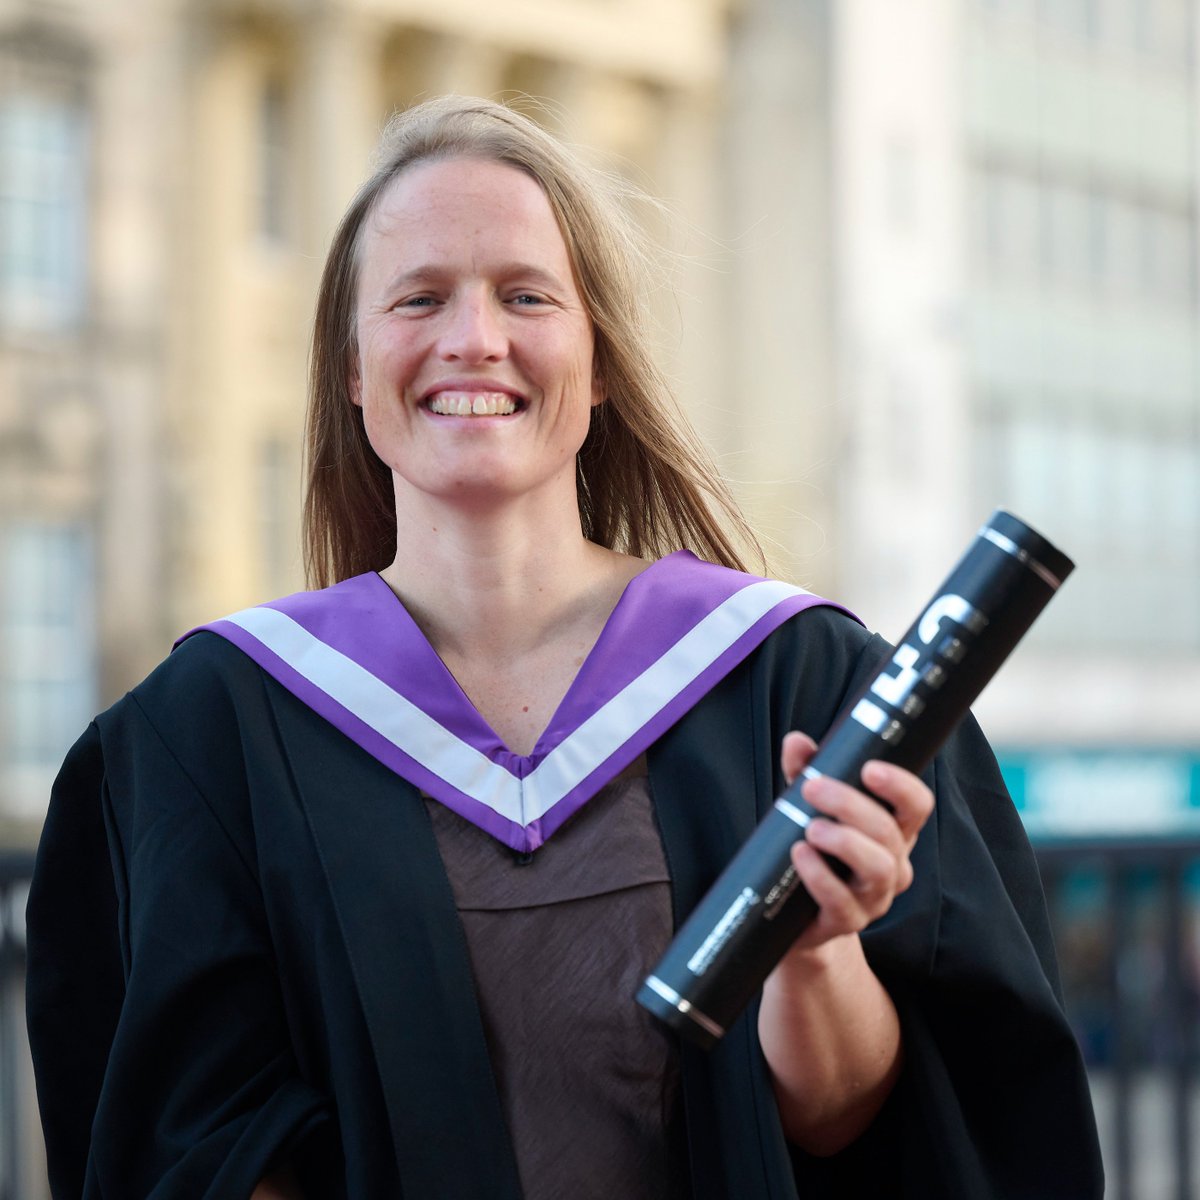 “I enjoyed learning so many things. The teaching was so interesting and effective, and I always felt supported and encouraged by my lecturers,” she said.

#UHIinverness #ThinkUHI #UHIGrad #CaseStudy #inverness #scotland